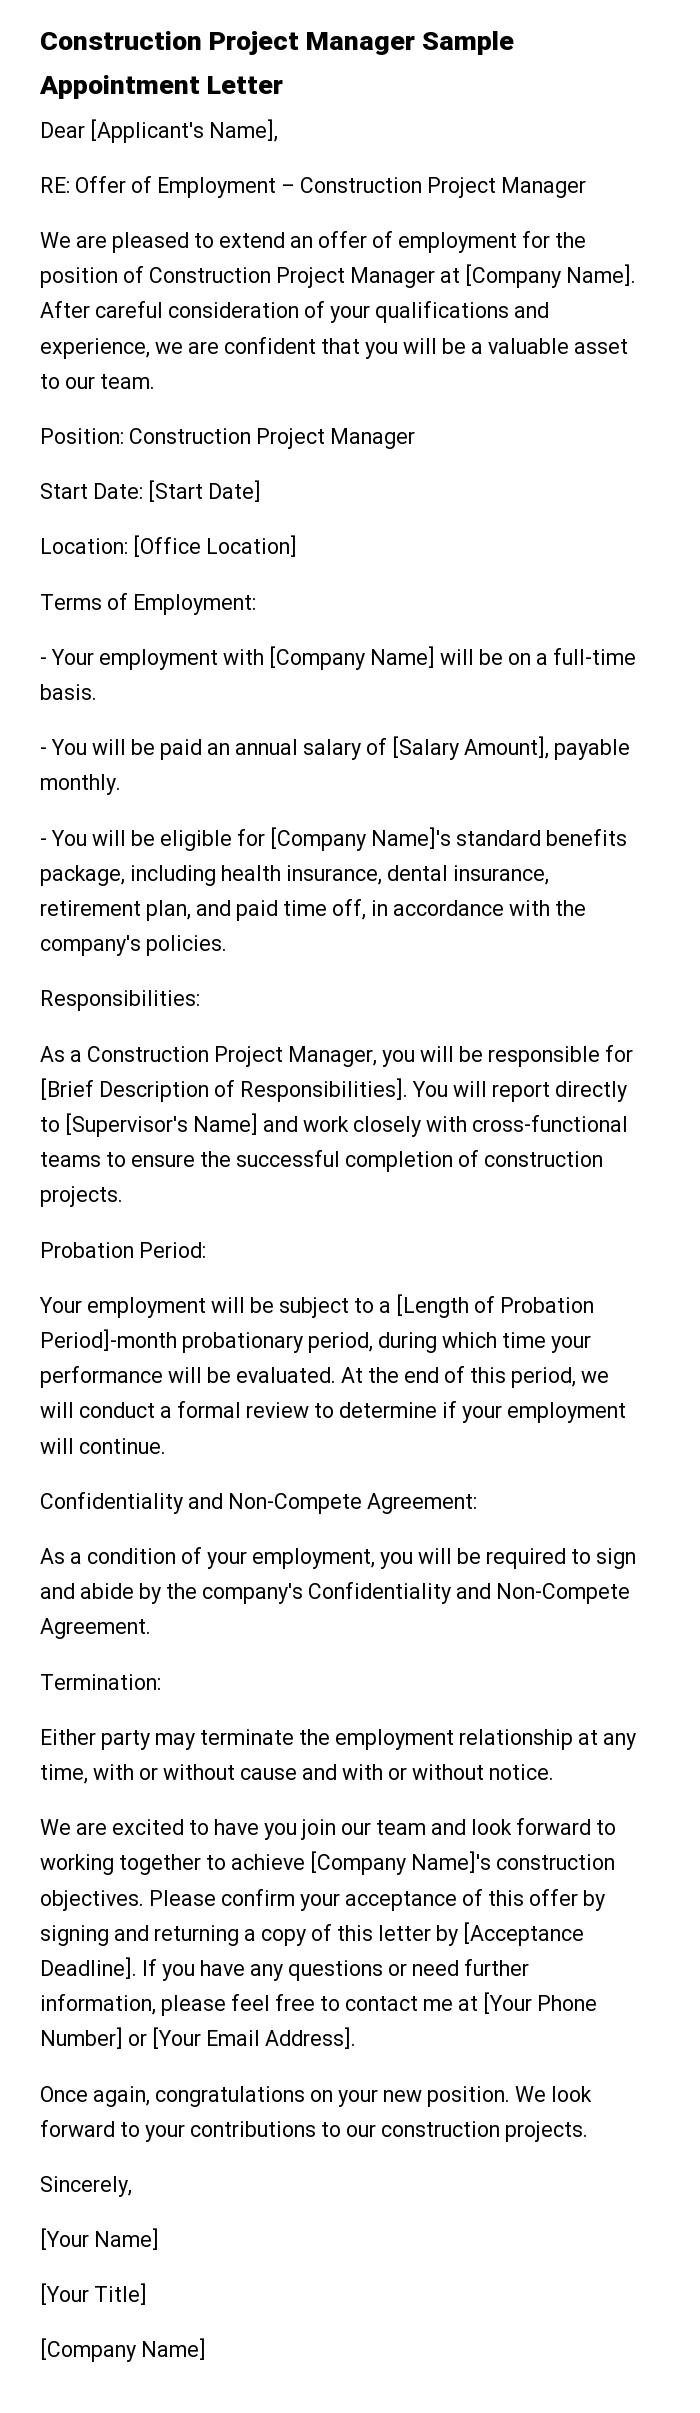 Construction Project Manager Sample Appointment Letter